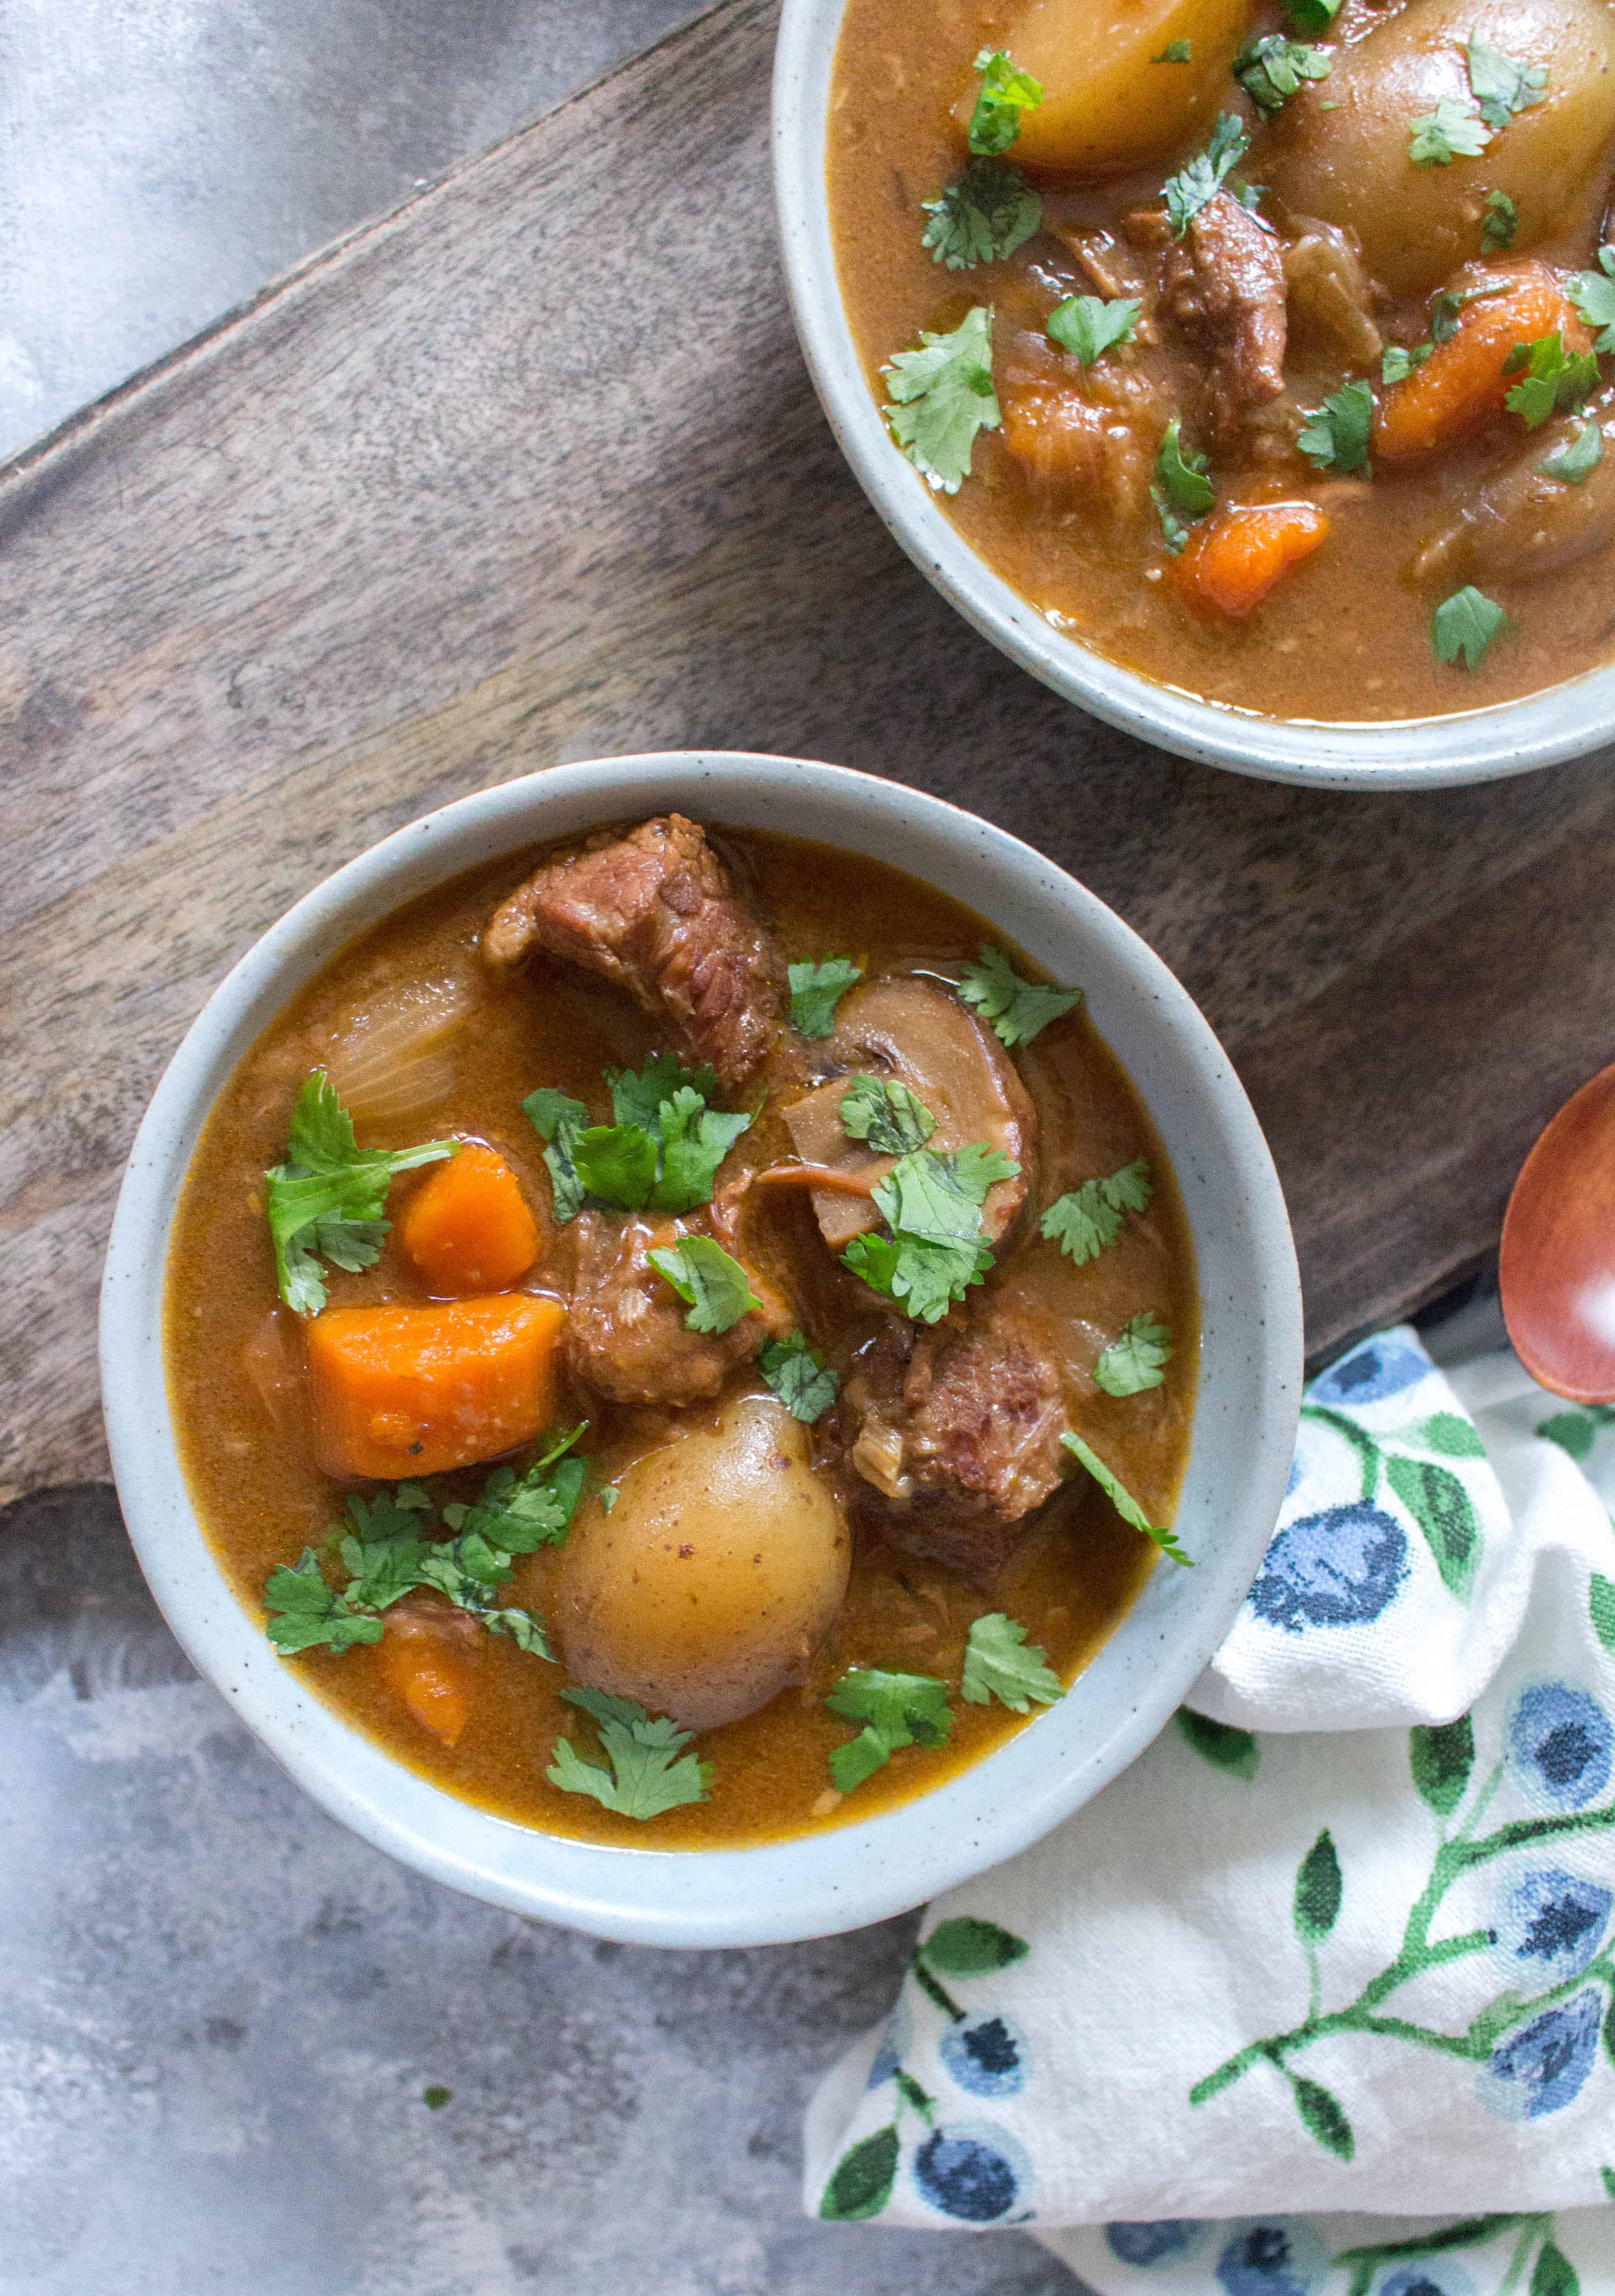 This super Easy Instant Pot Beef Stew will have you grabbing a second bowl! A thick and rich sauce filled with hearty potatoes, carrots, onions, and melt in your mouth beef that will only take under an hour with an Instant Pot! #instantpotrecipes #easyinstantpotrecipes #beefstewrecipes